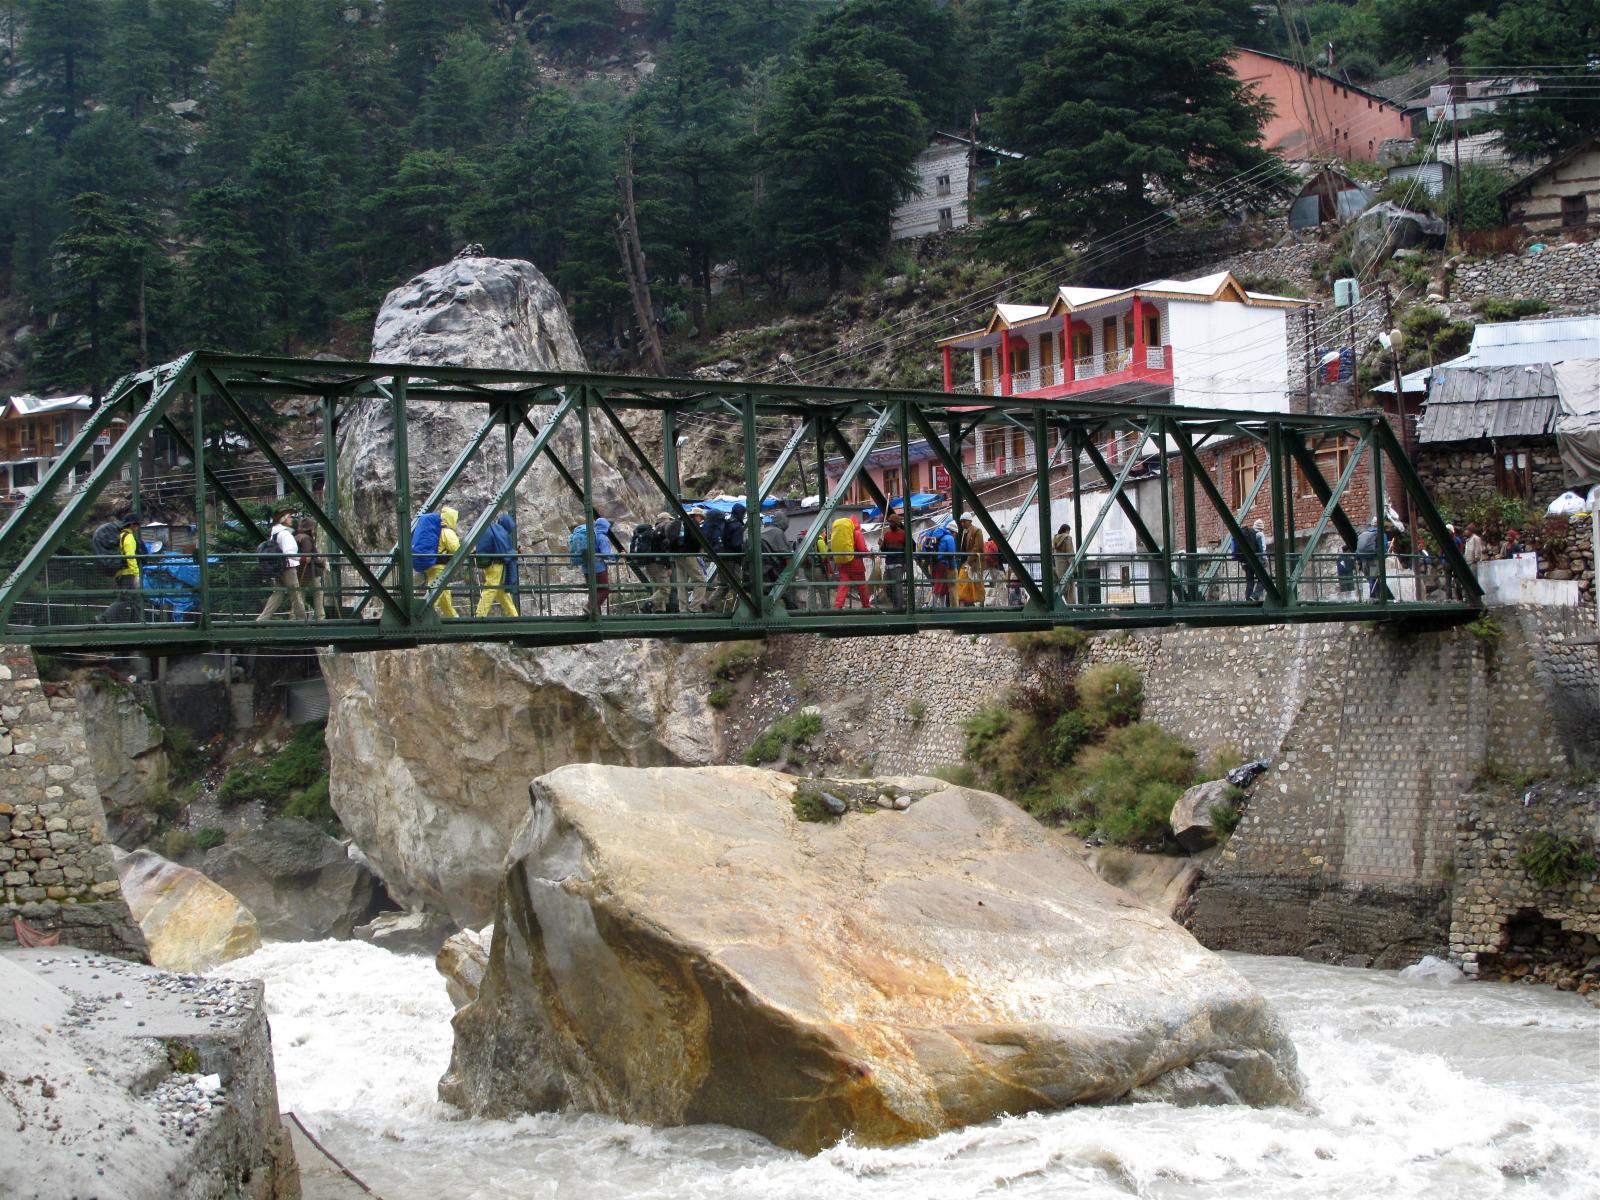 a bridge over some water with people standing on it